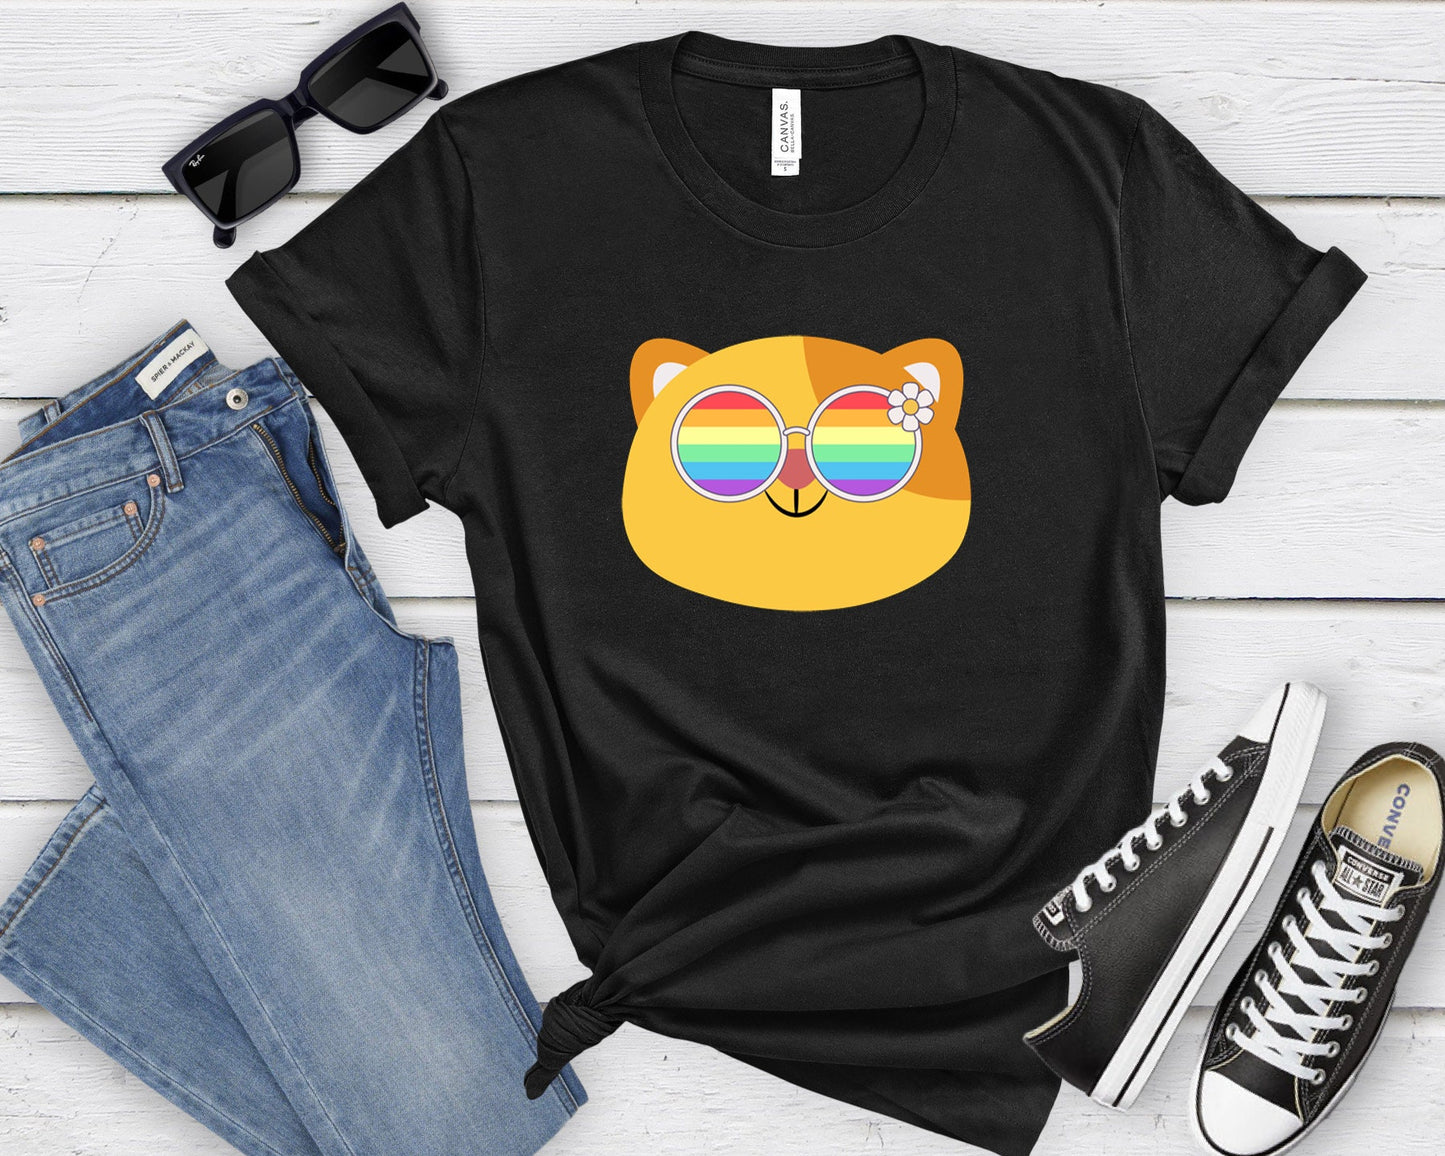 Super cute cat with rainbow glasses shirt blue hat, Rainbow glasses on an adorable cat, precious cat showing off pride. Beautiful pride cat